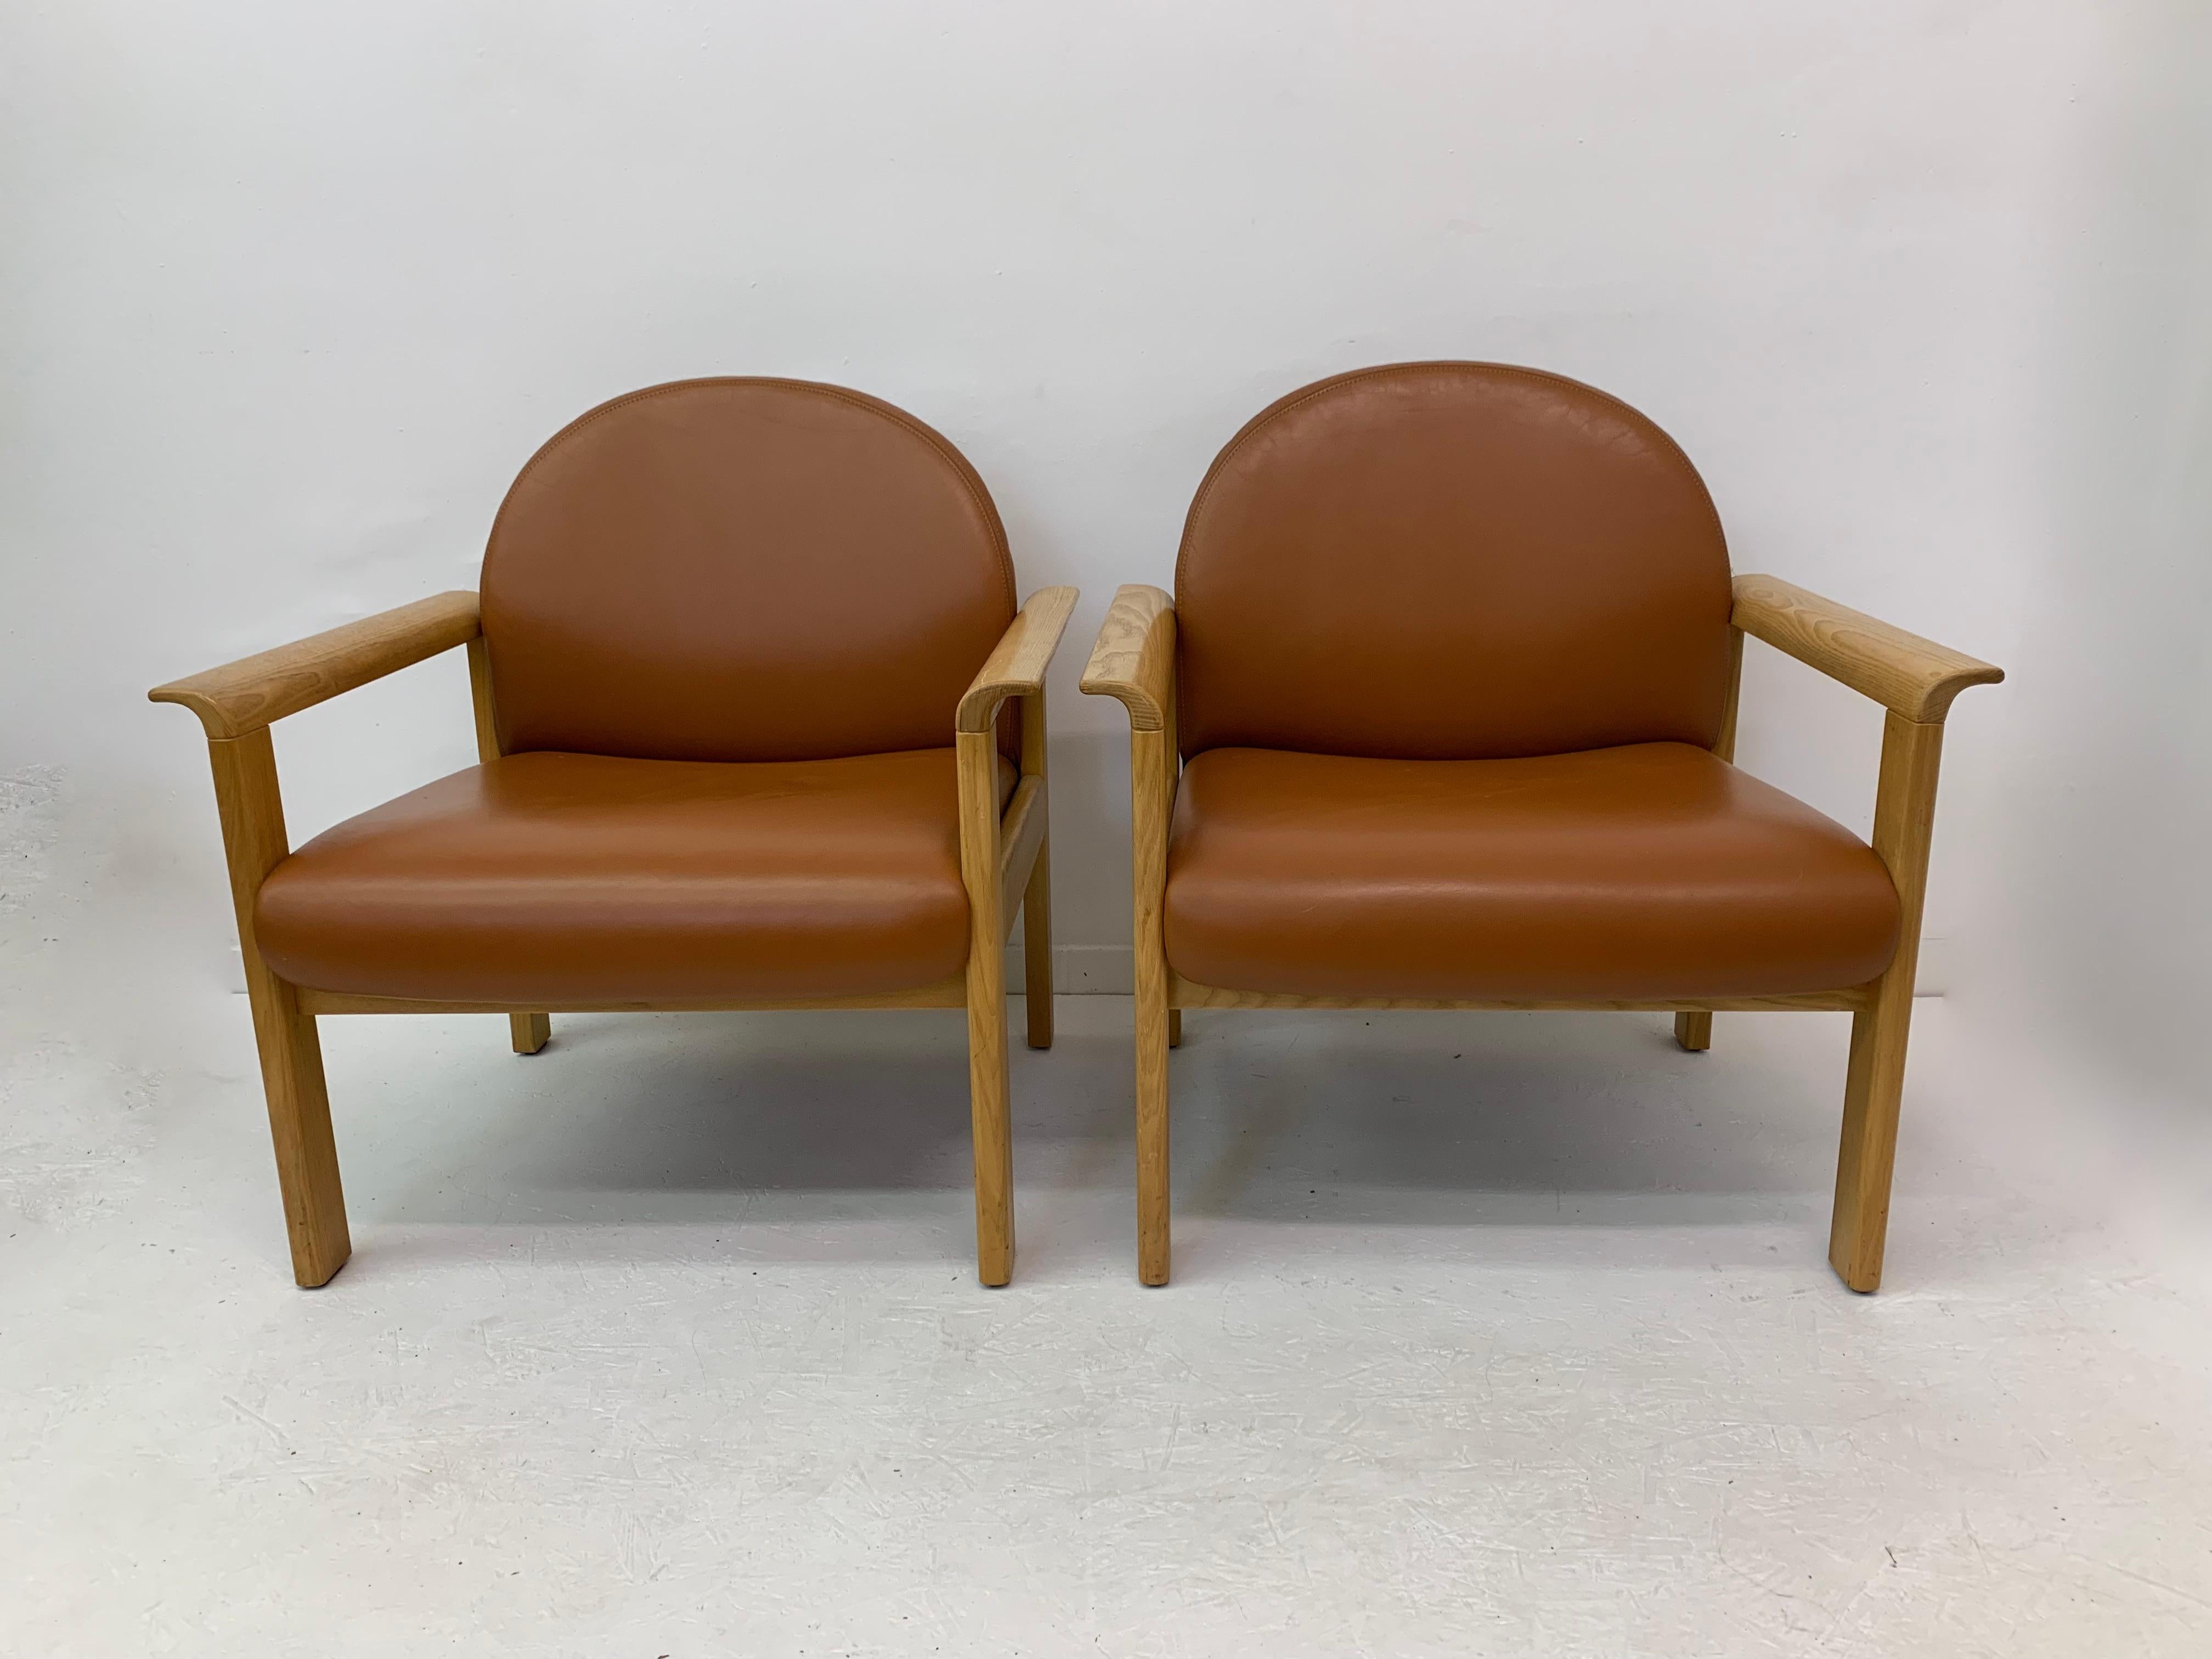 Set of 2 Leather Lounge Chair, 1970’s For Sale 1